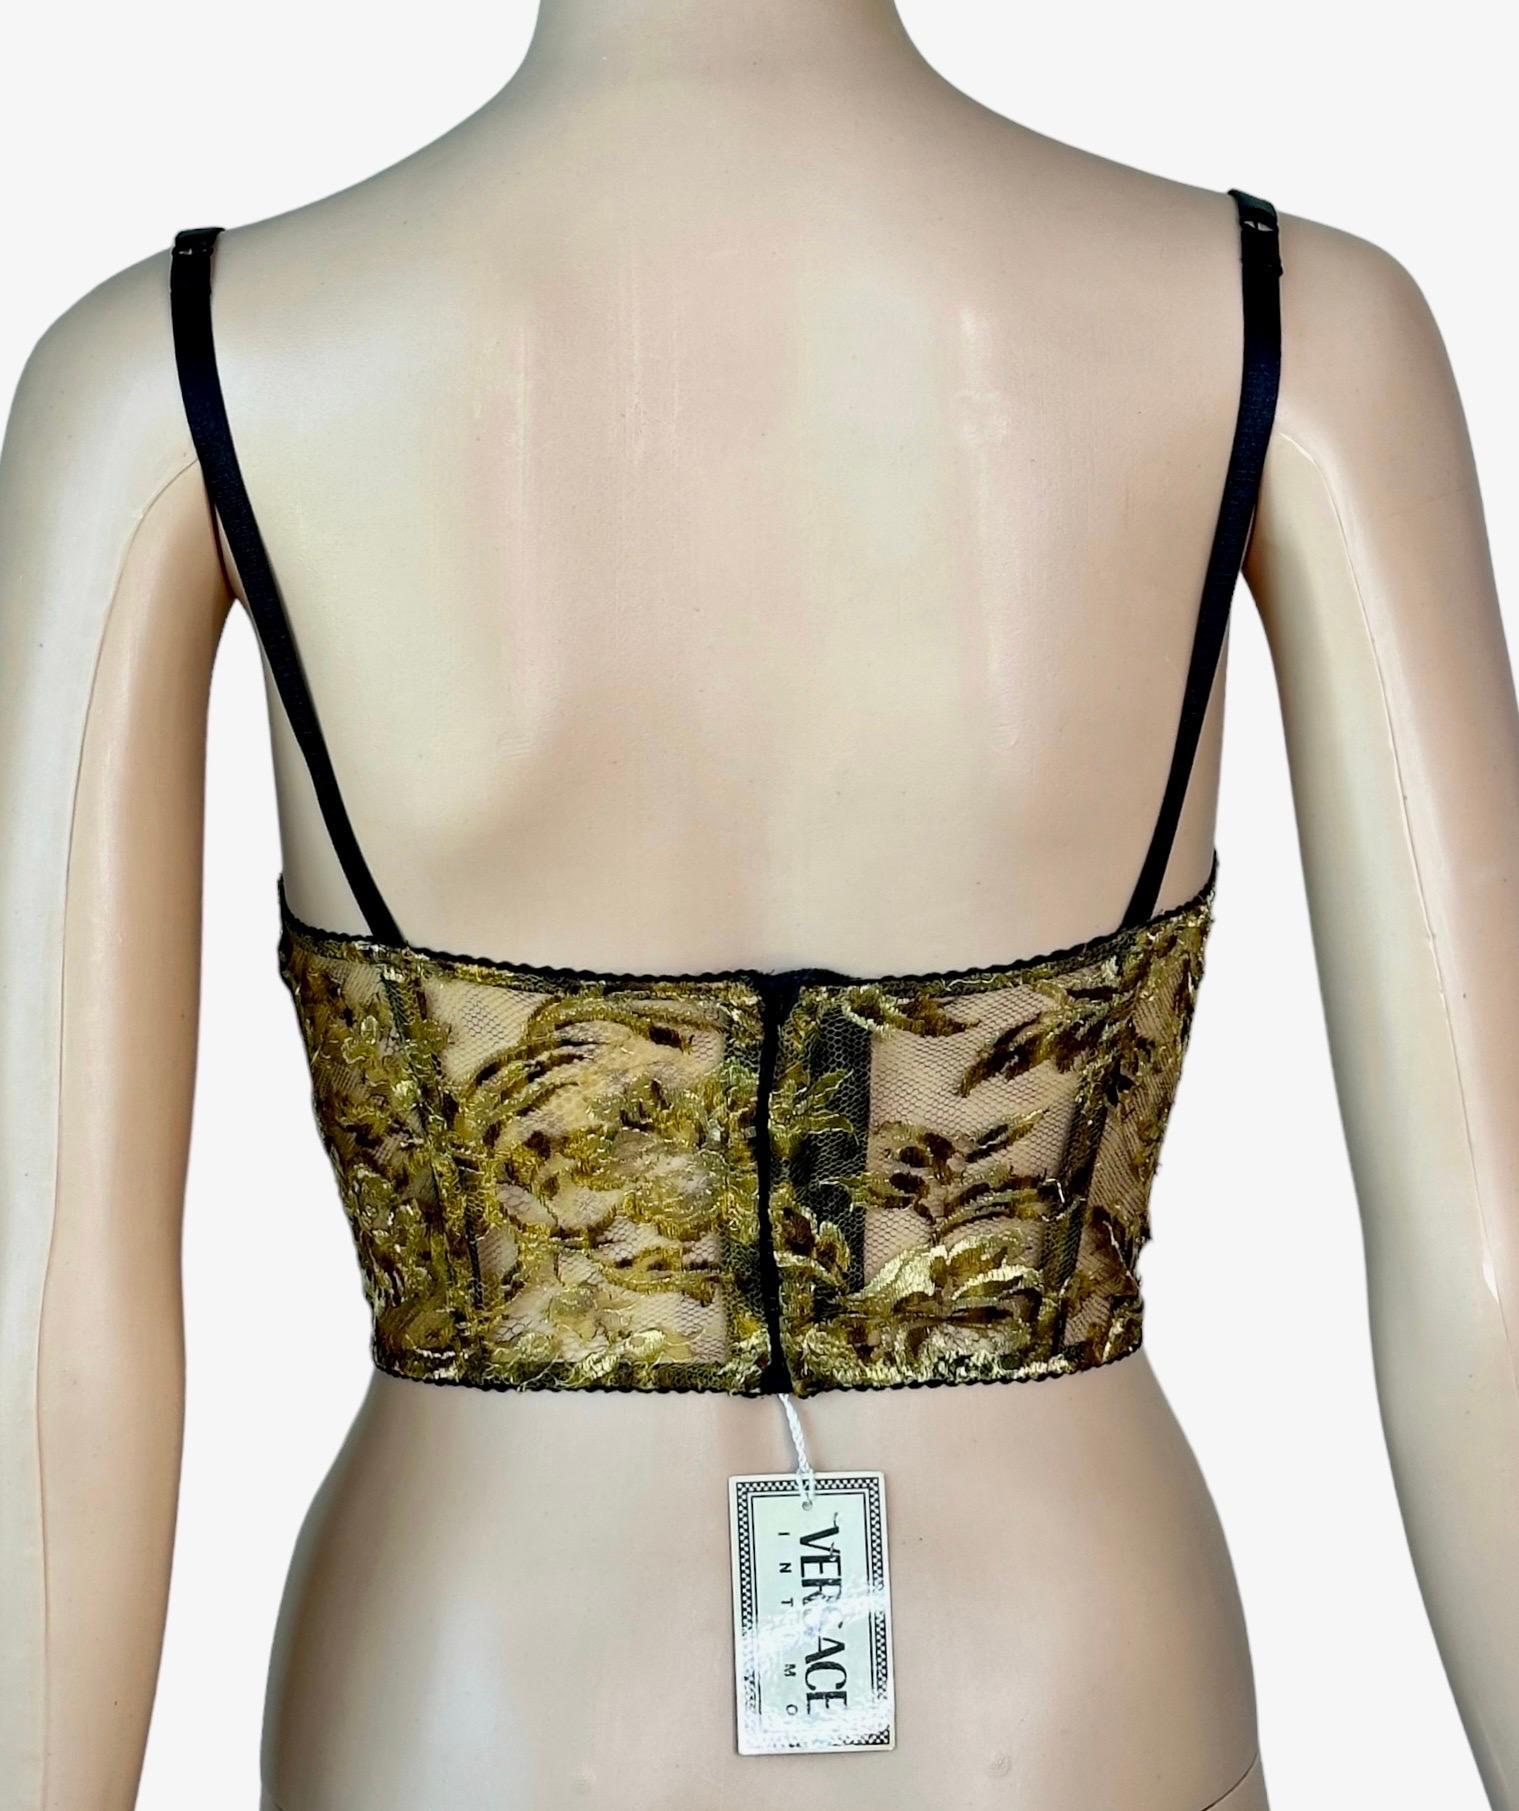 Gianni Versace S/S 1992 Unworn Sheer Gold Embroidered Lace Bustier Bra Crop Top  For Sale 4